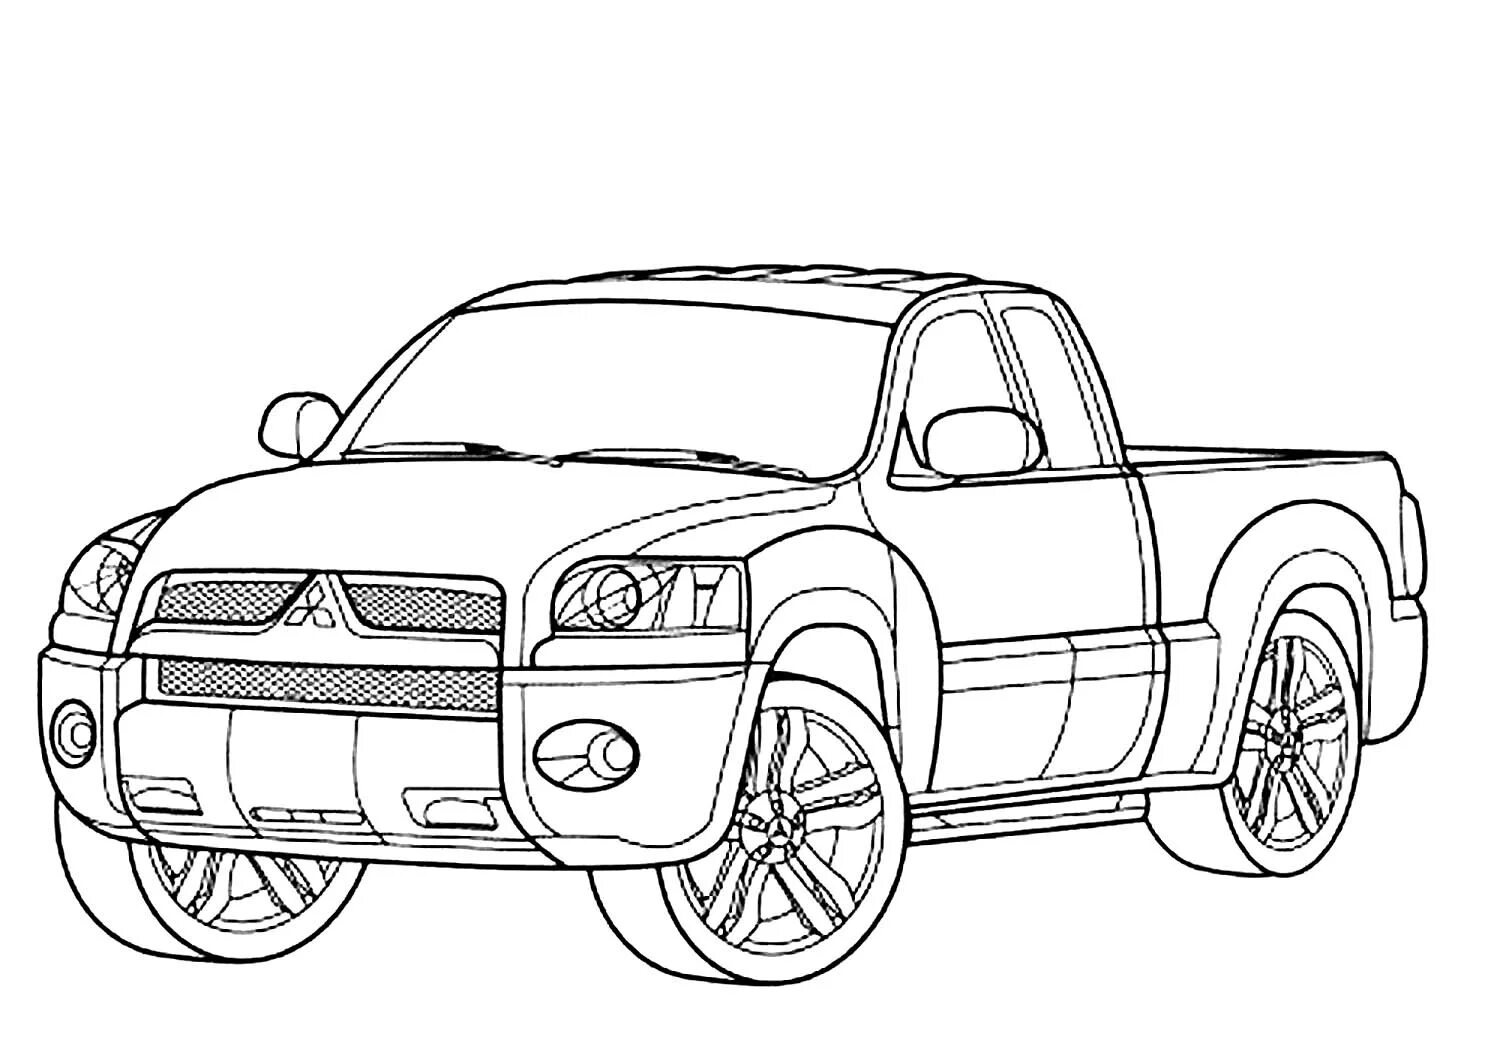 Coloring page funny passenger car